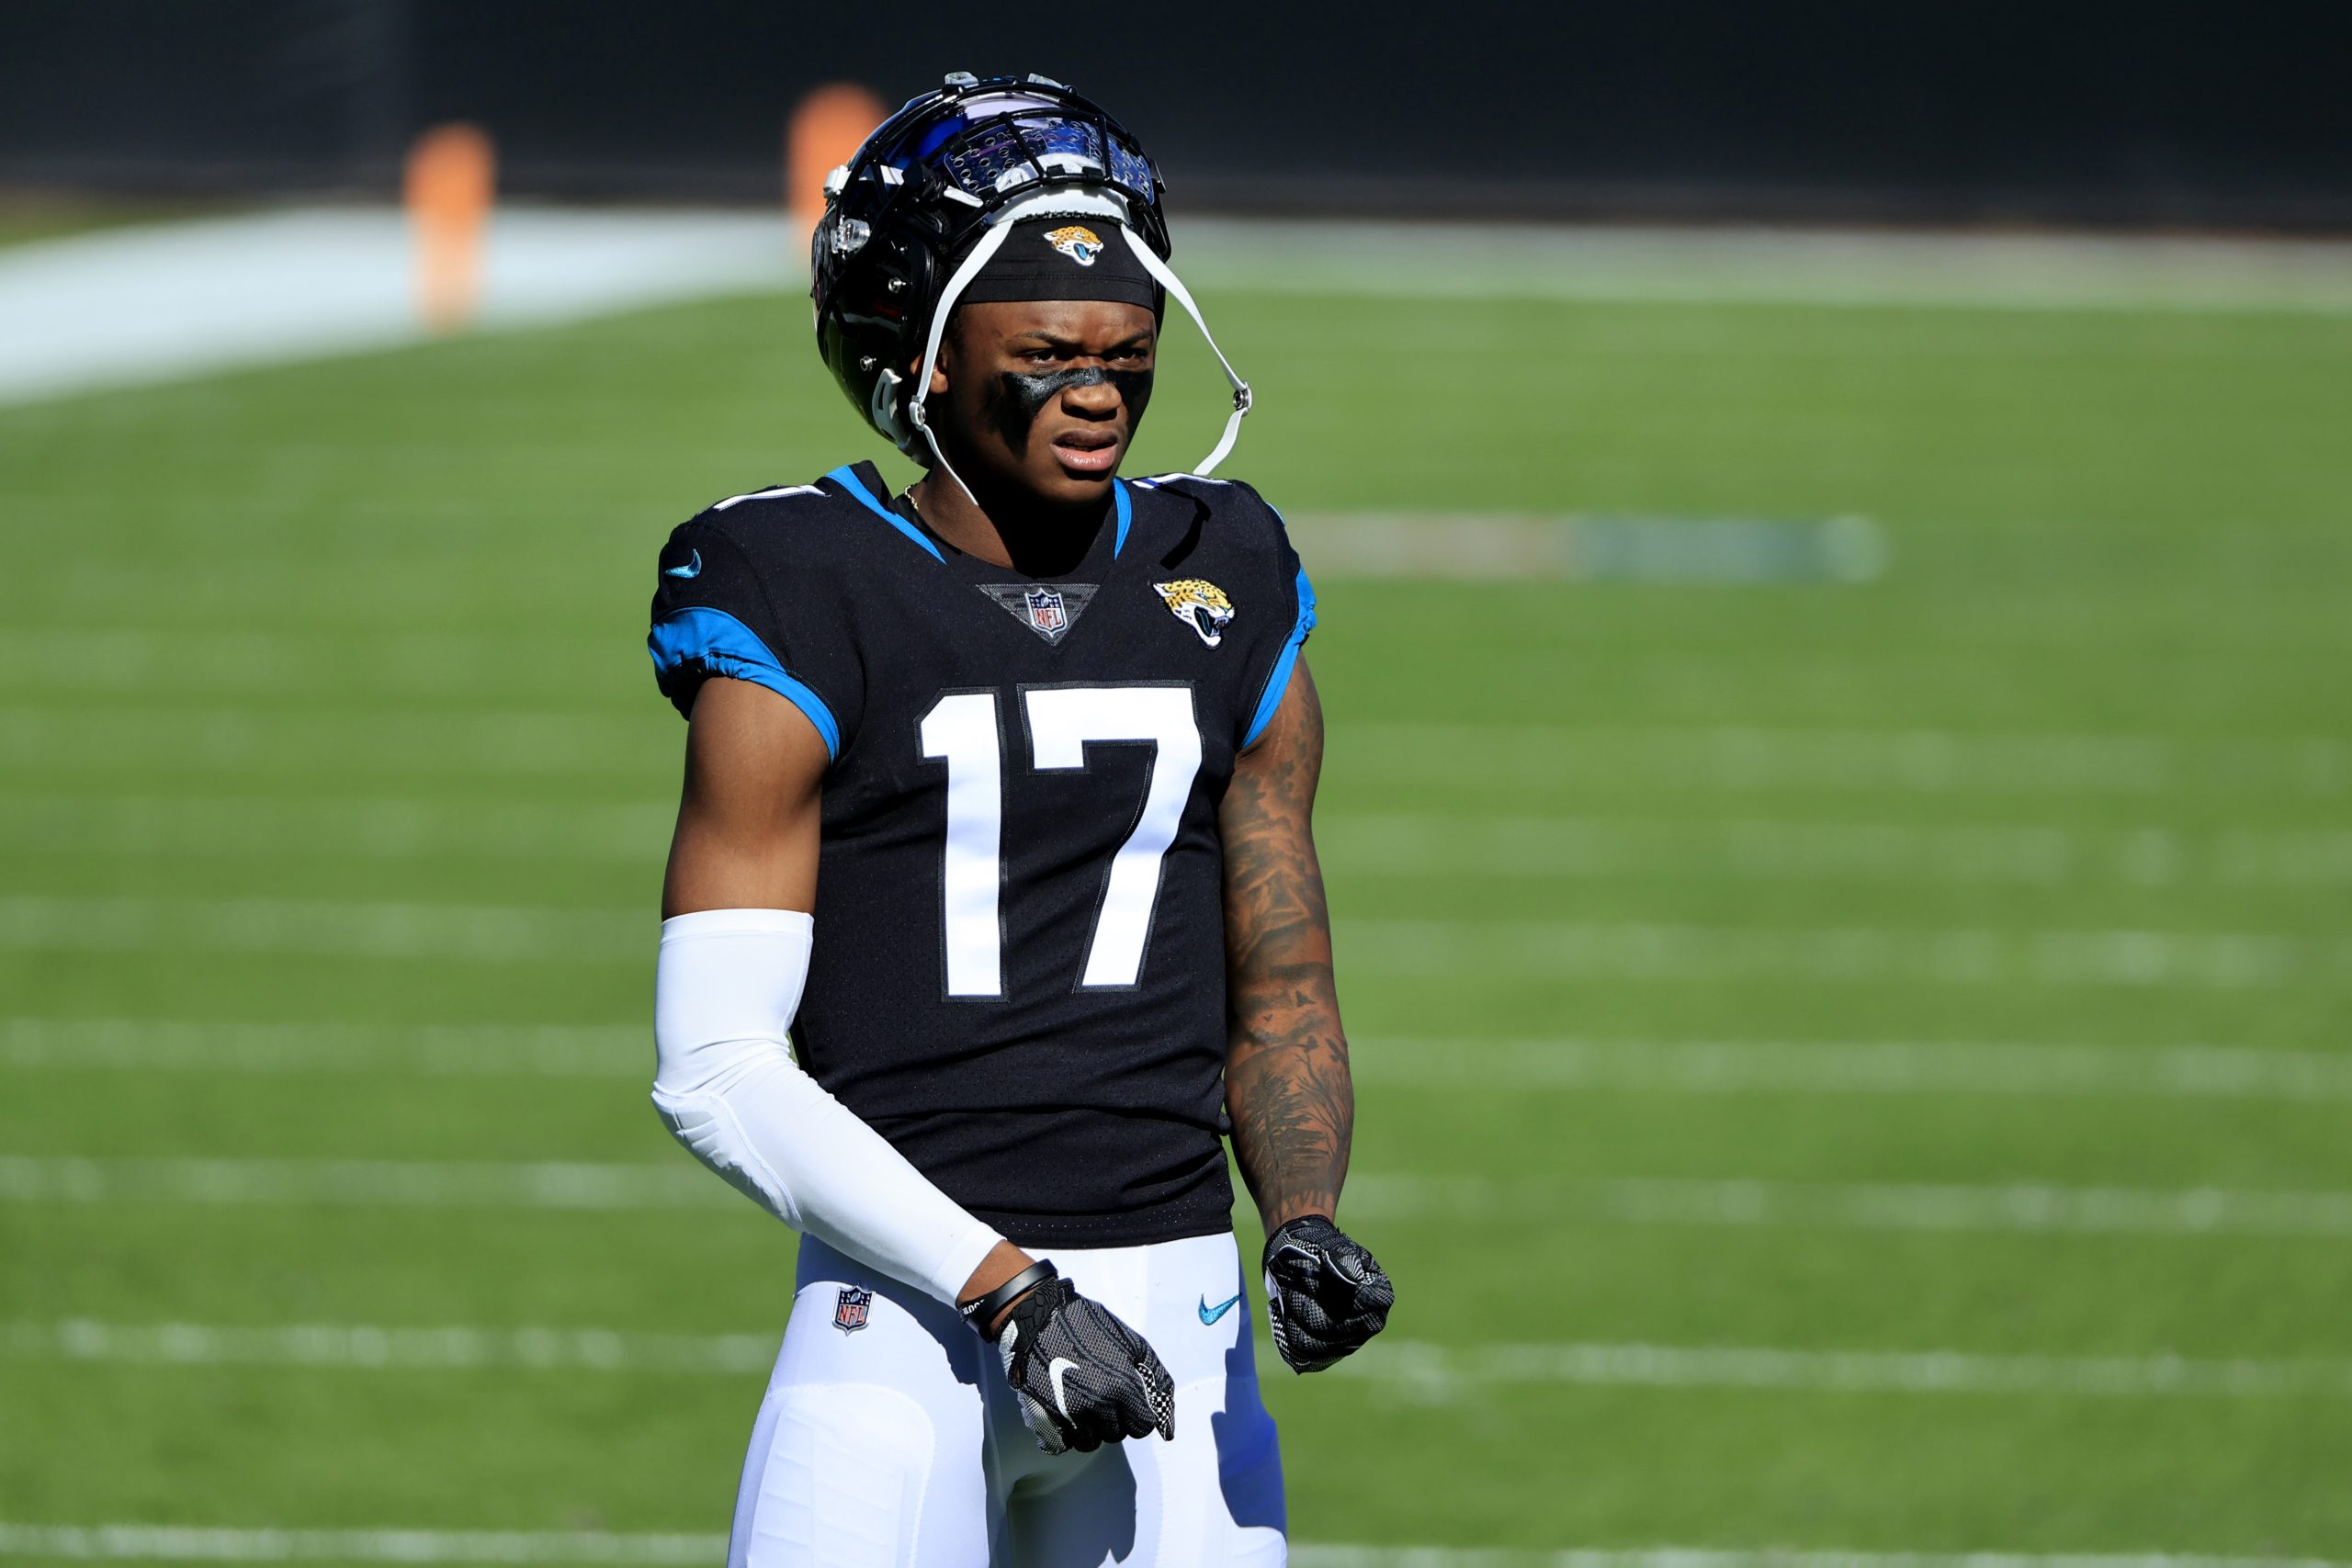 The Panthers are Looking to Trade for a New Starting Wide Receiver